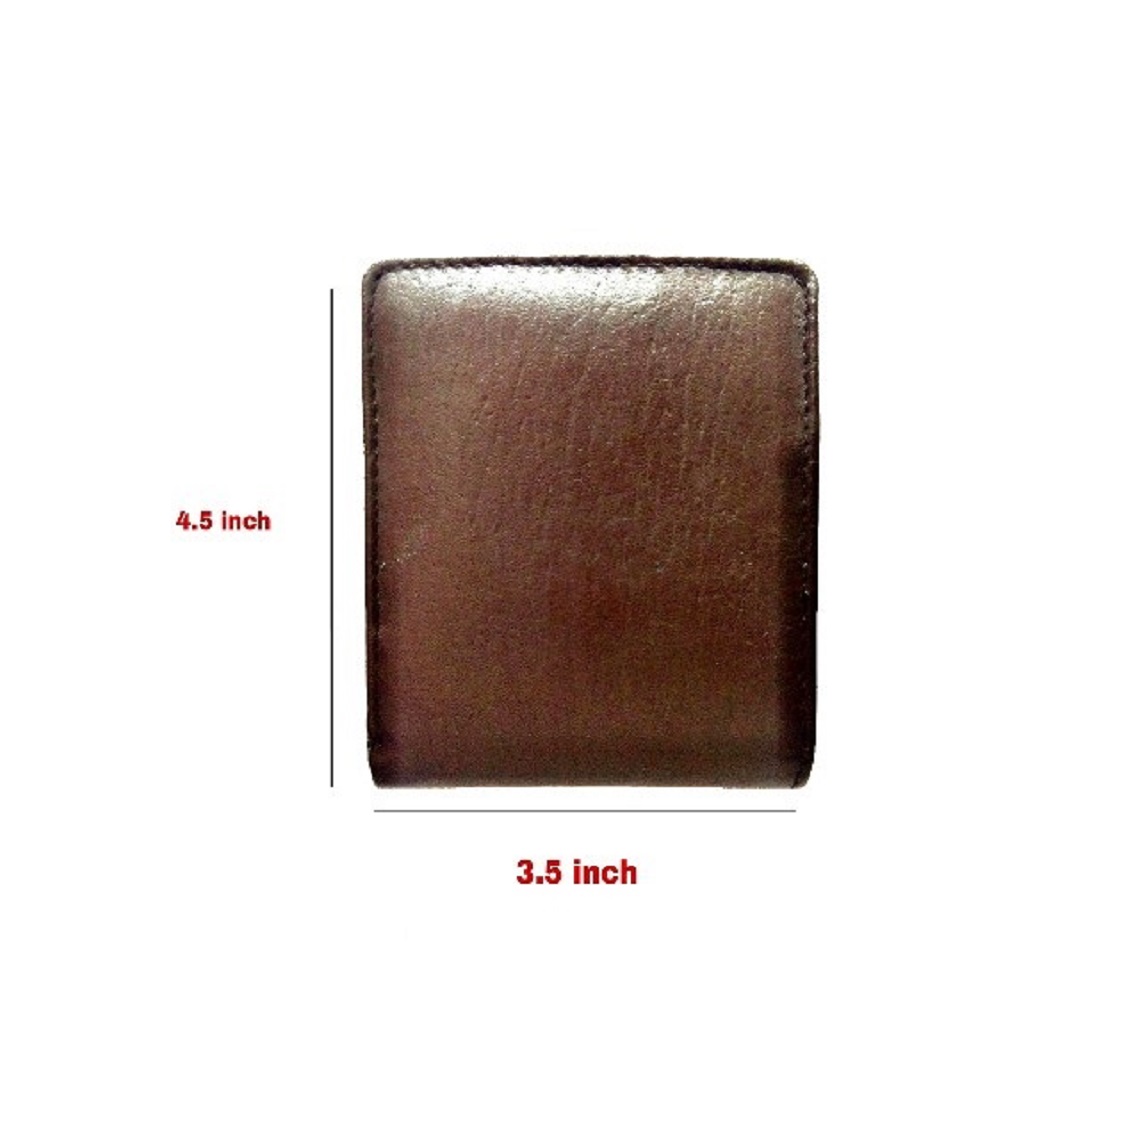 Buy Arizic Brown Leather Wallet For Mens Online @ ₹199 from ShopClues